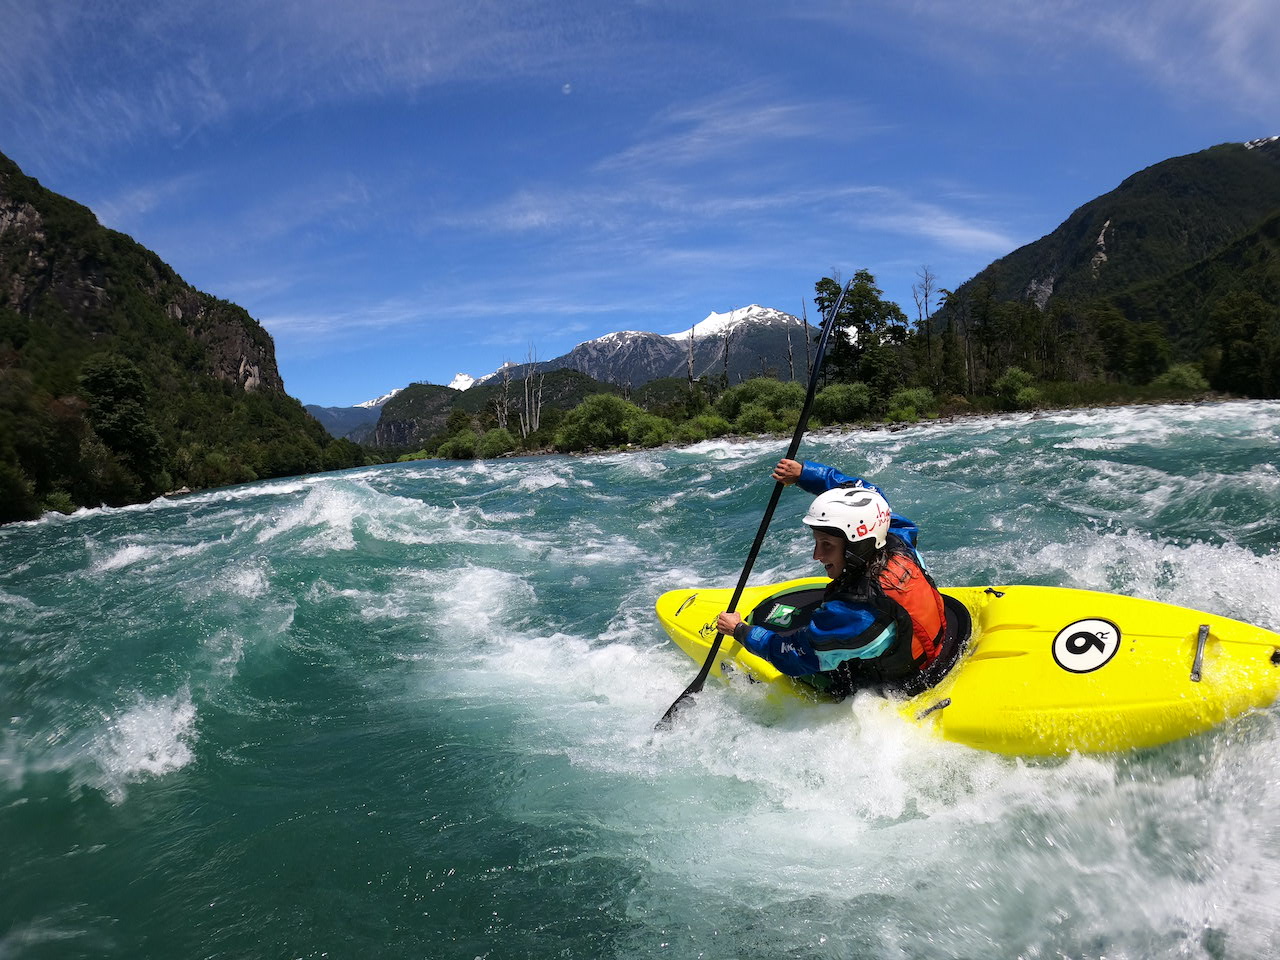 person in yellow kayak and helmet going down the river